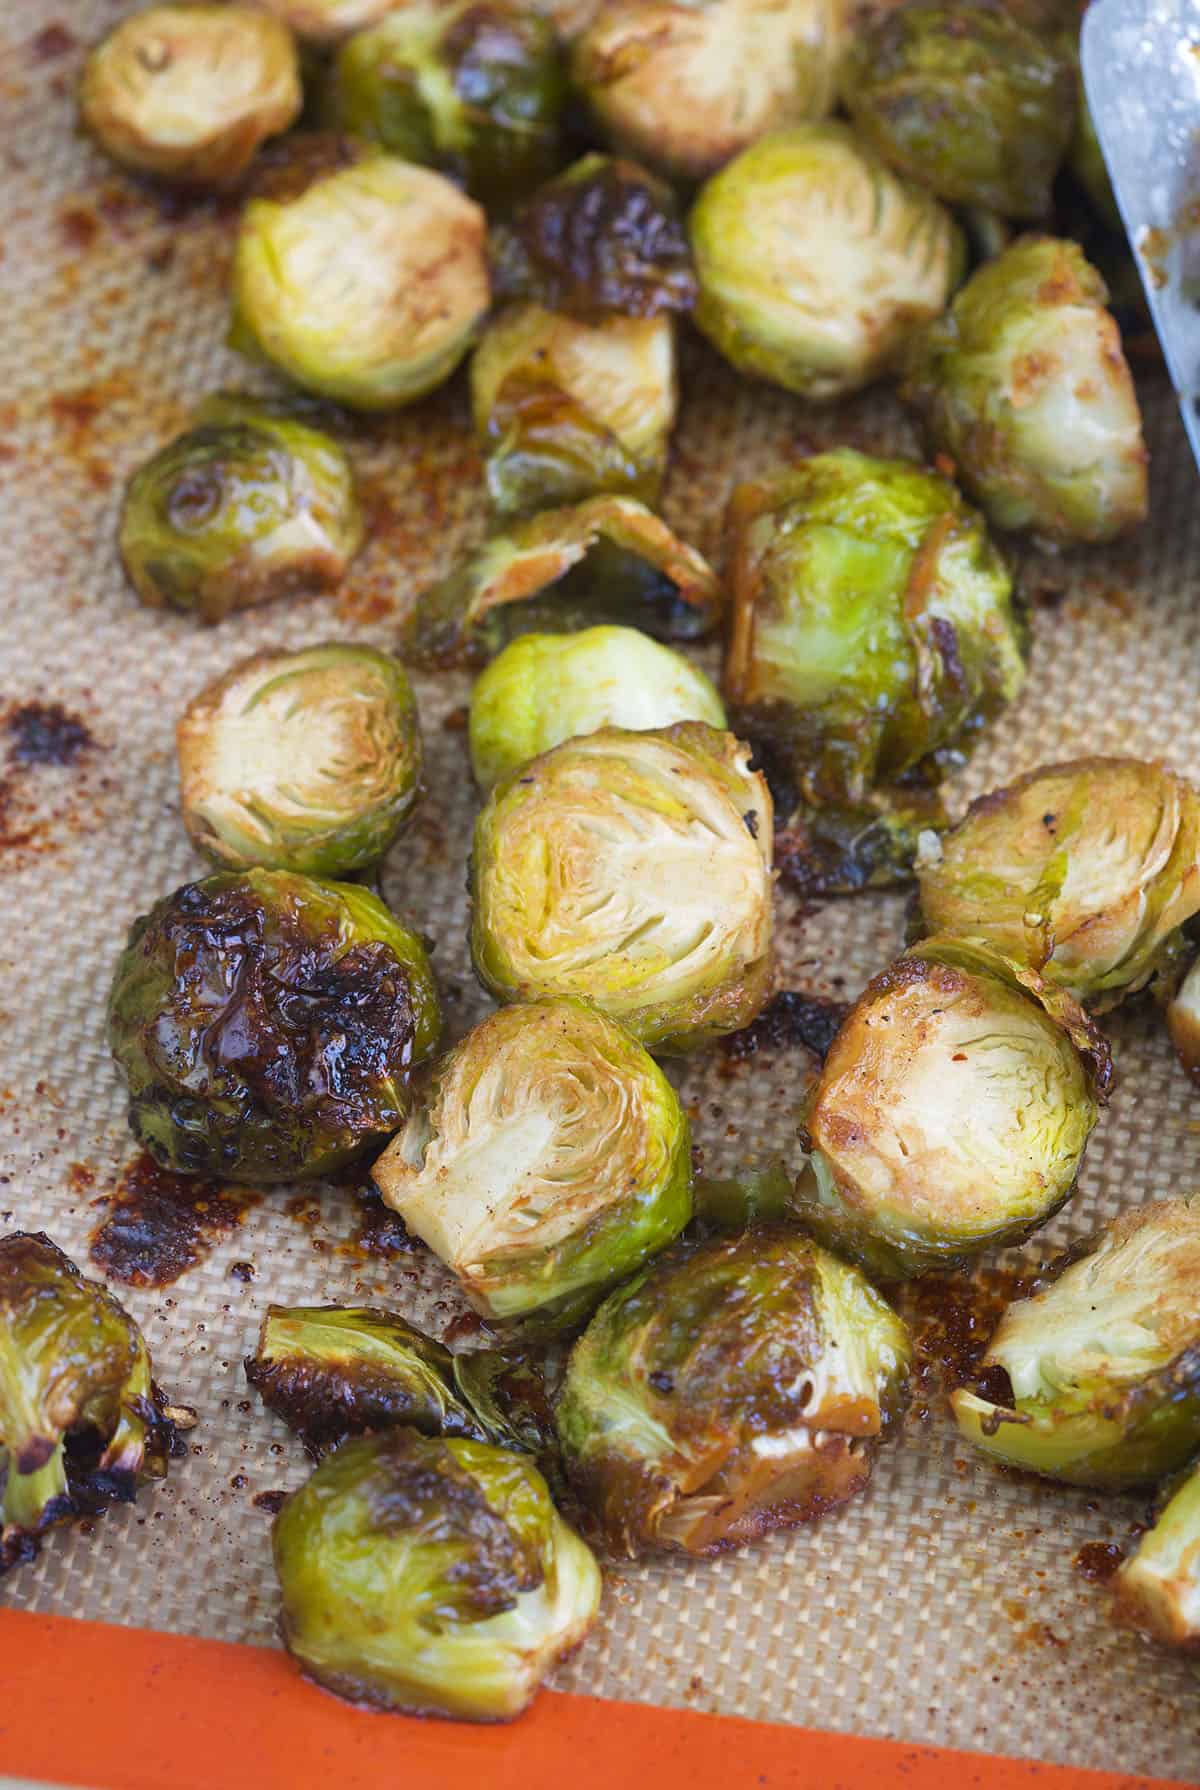 Cooked brussel sprouts are presented on a baking sheet.